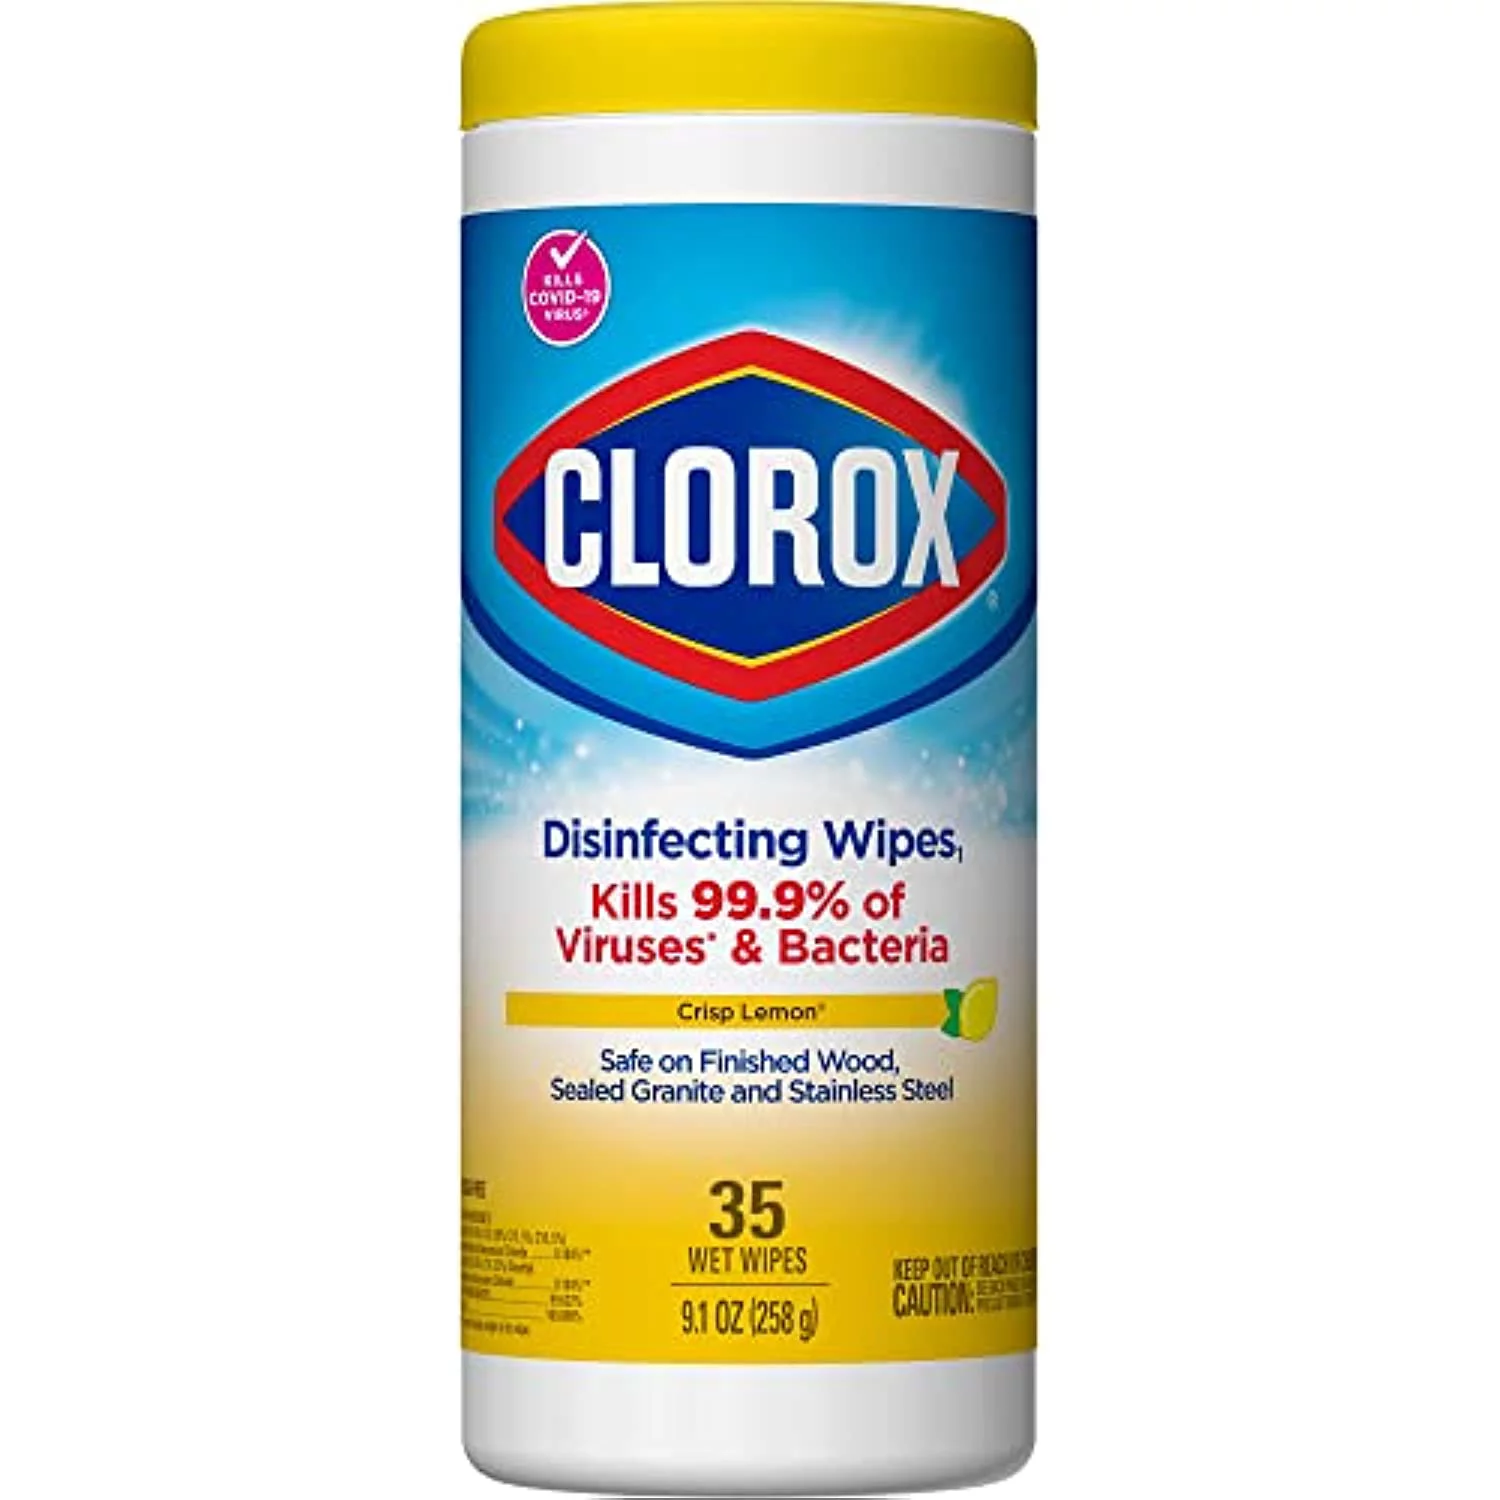 Keep your surroundings clean with Clorox Disinfecting Wipes!